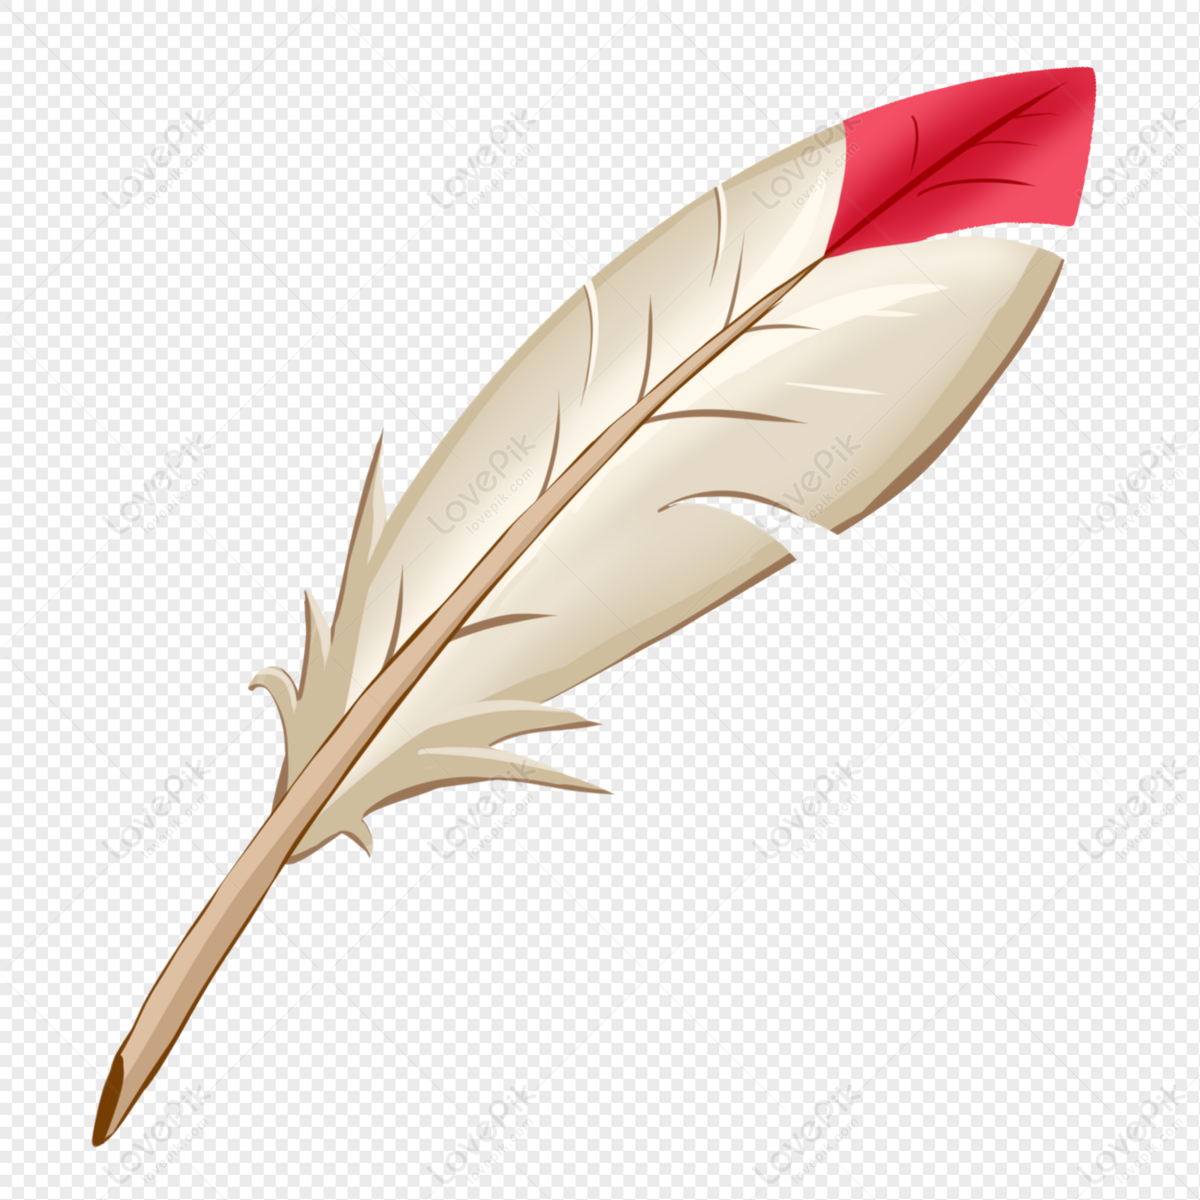 https://img.lovepik.com/free-png/20210927/lovepik-white-feather-pen-png-image_401556166_wh1200.png